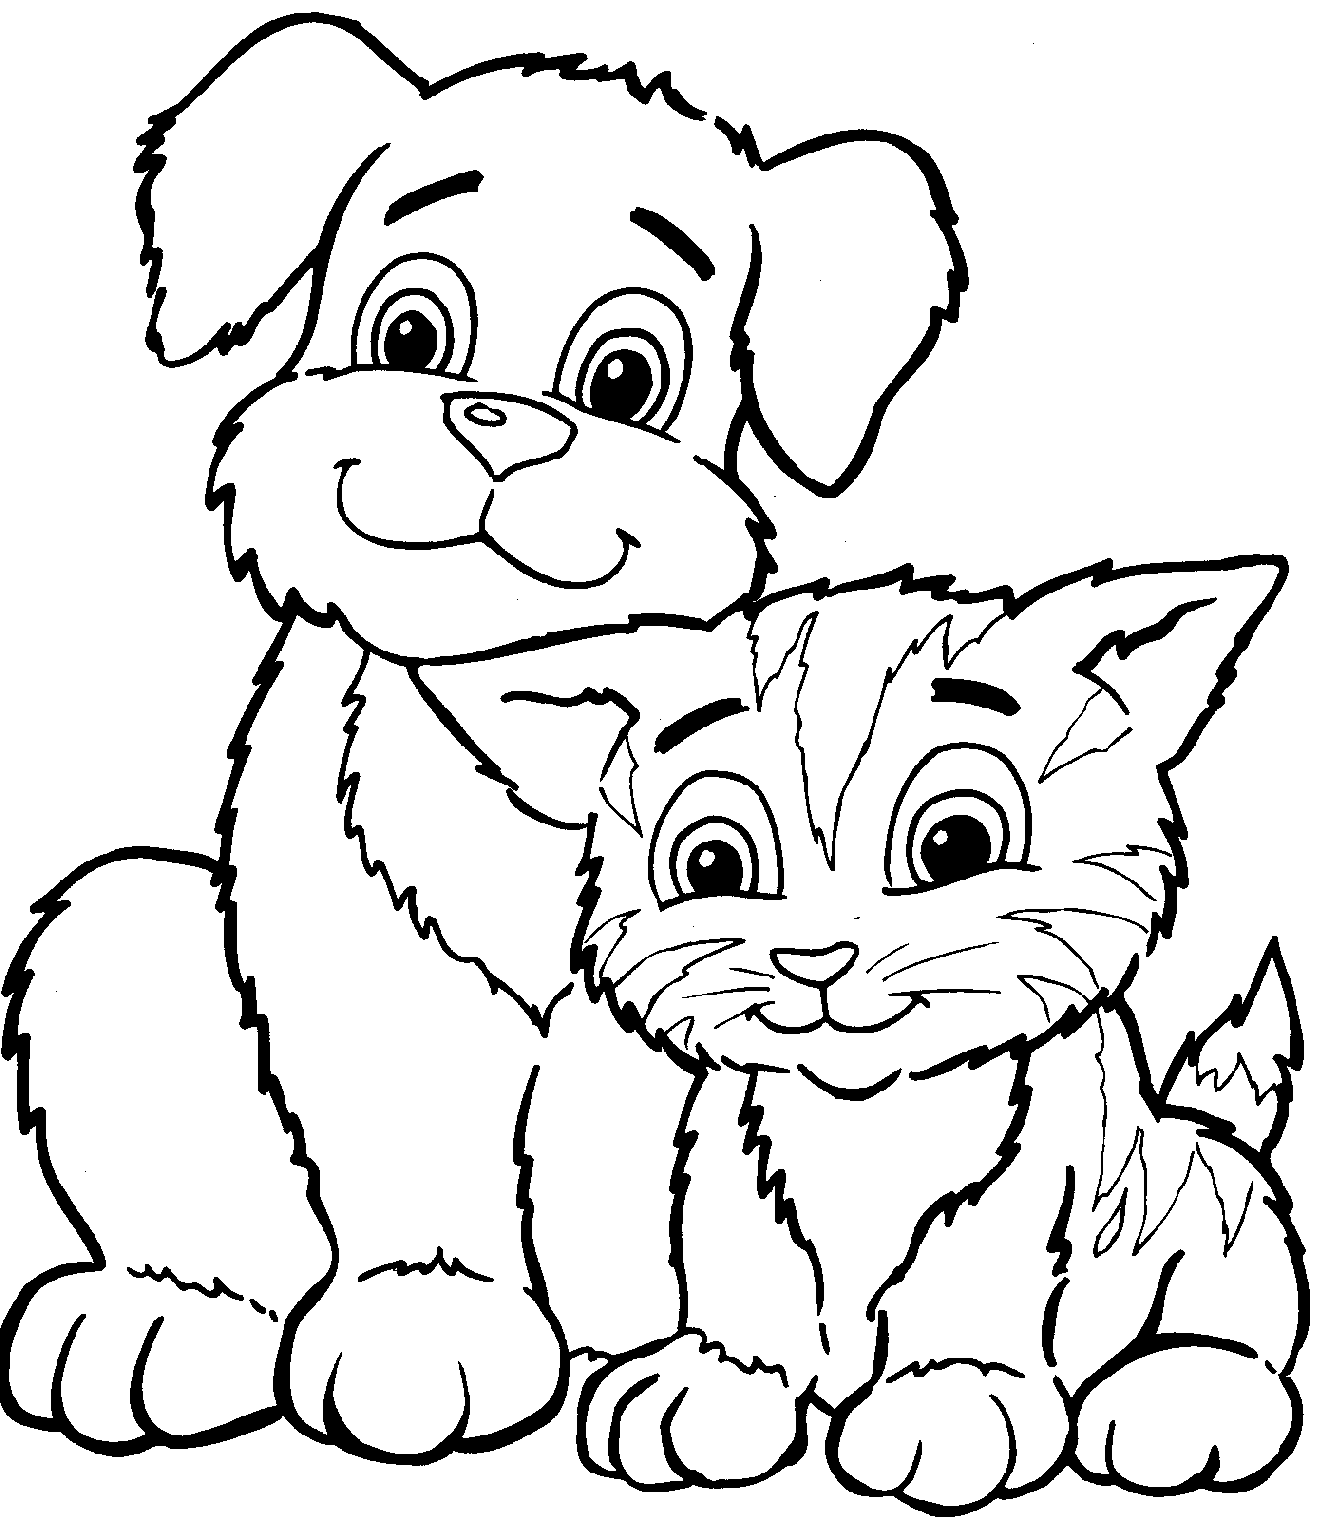 free printable cat coloring pages for kids - cat coloring page free ...